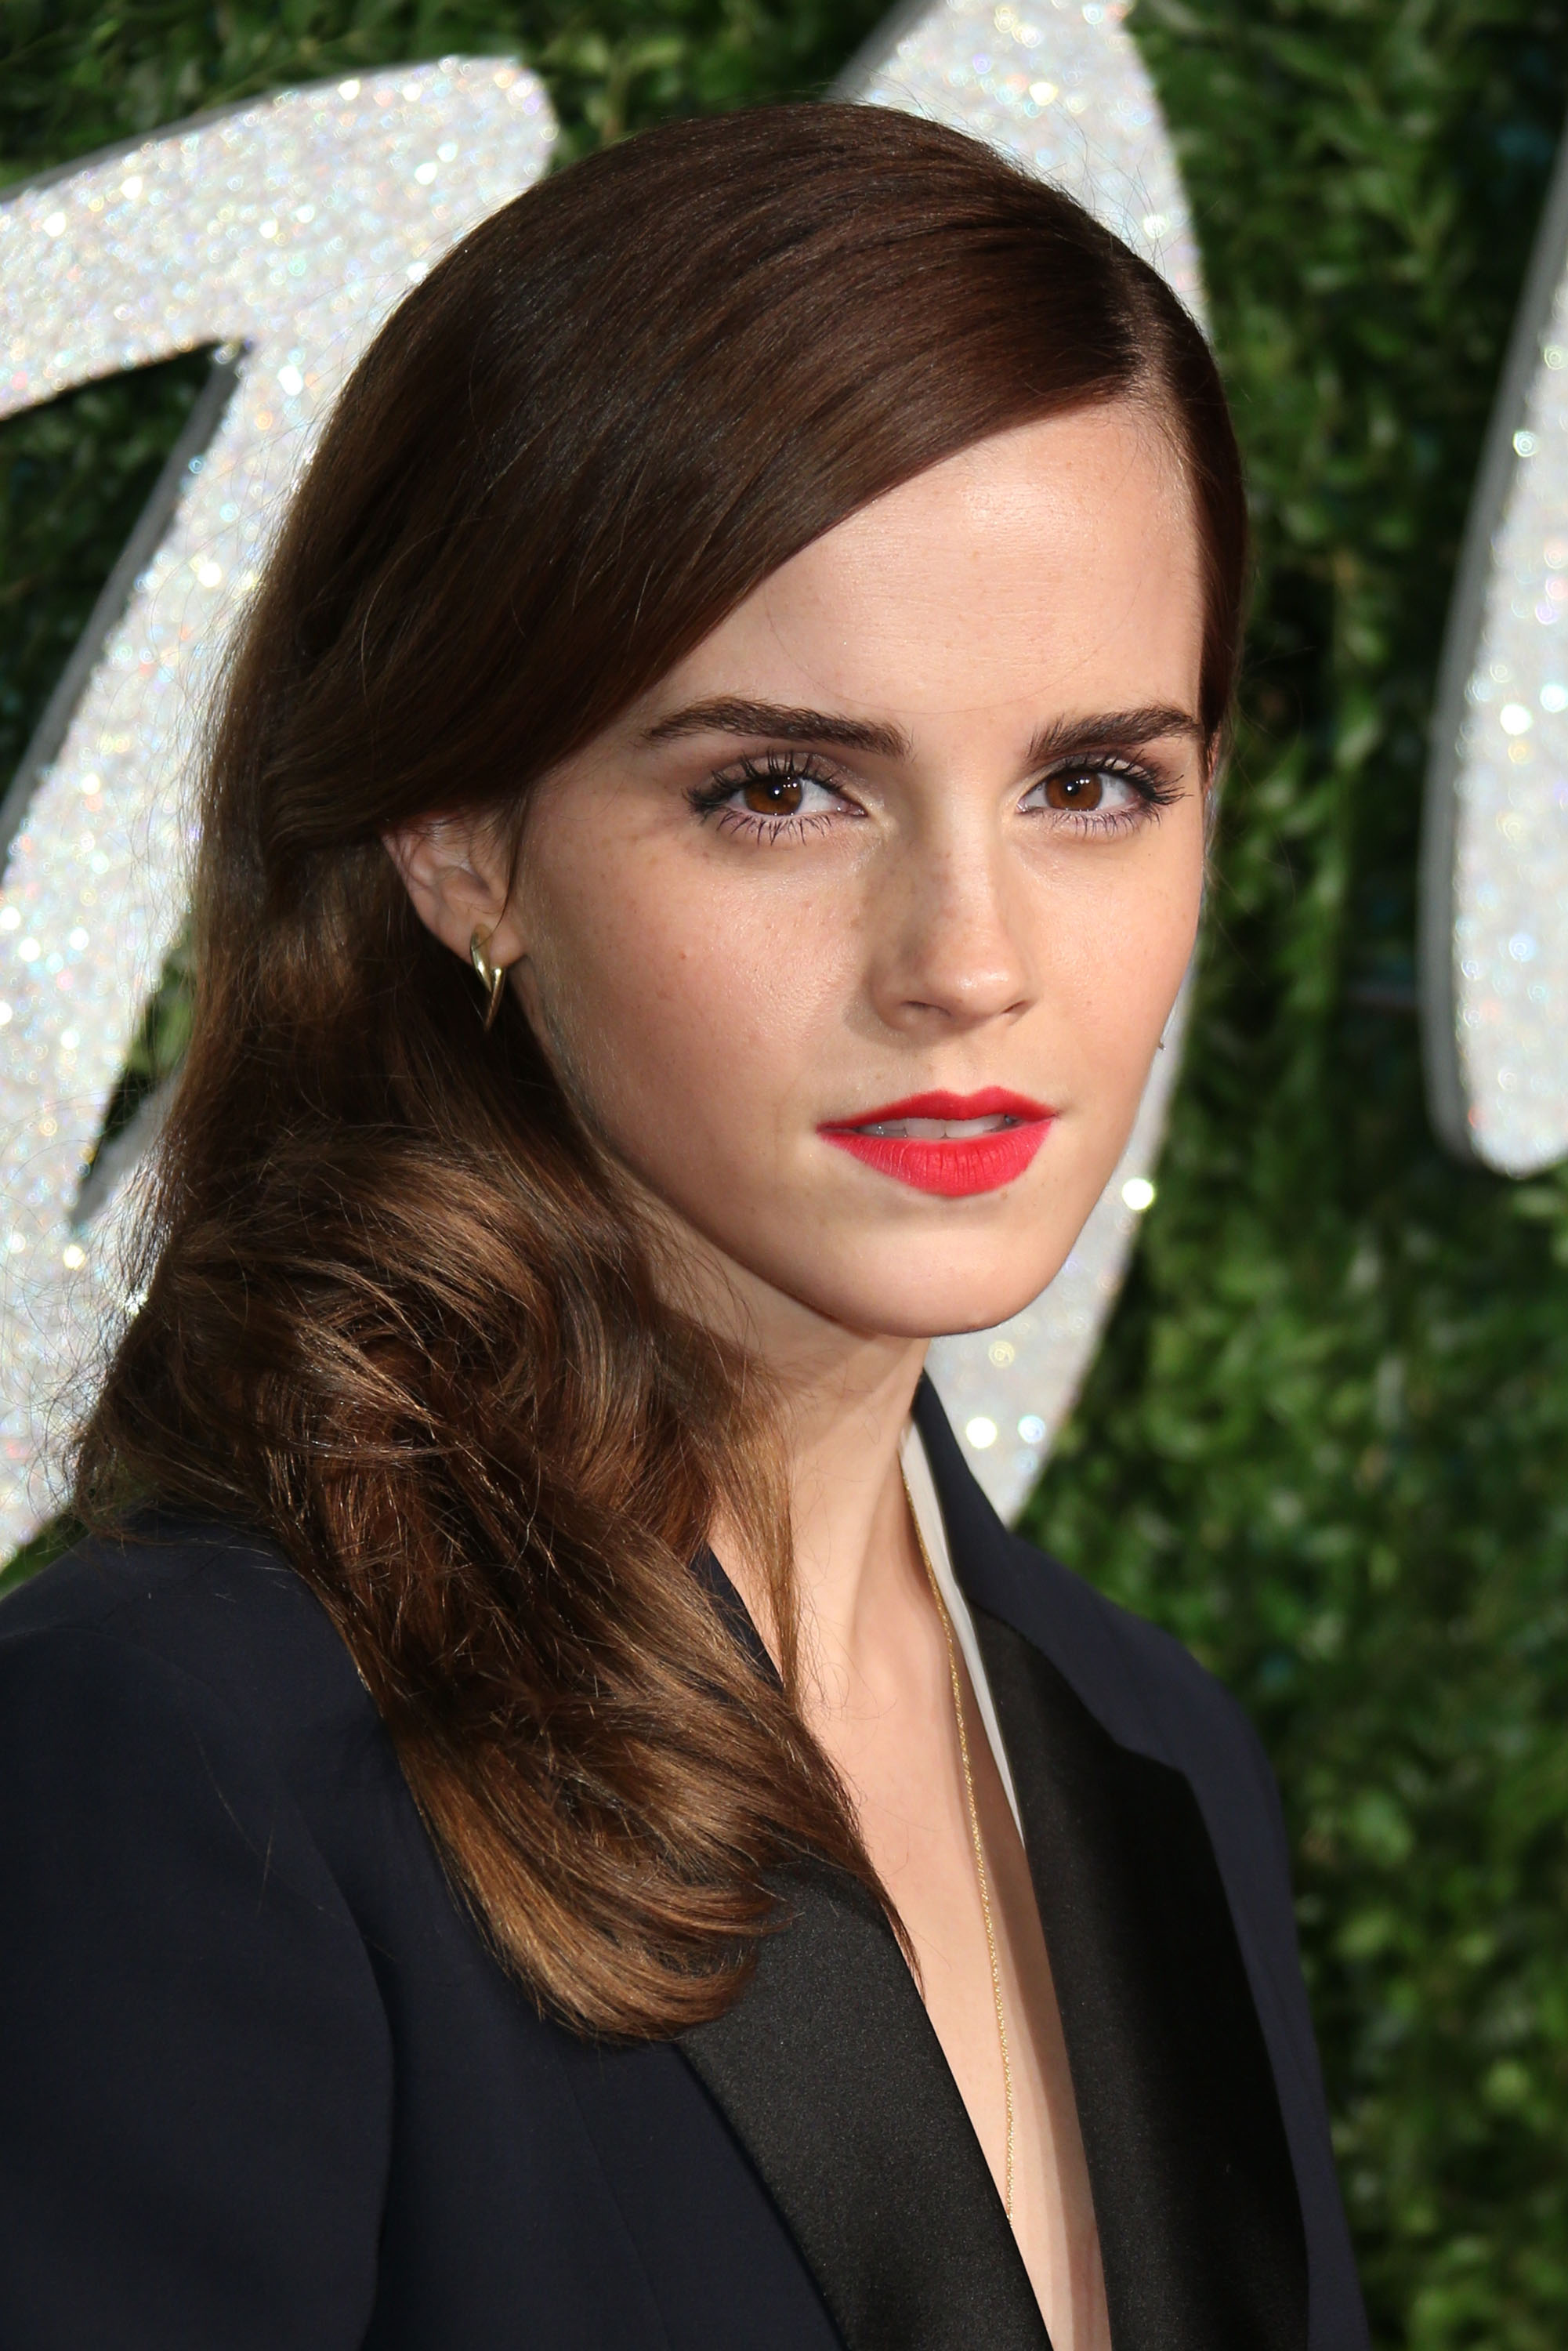 Emma Watson attends the British Fashion Awards at London Coliseum on December 1, 2014 in London, England. (Mike Marsland&mdash;WireImage/Getty Images)